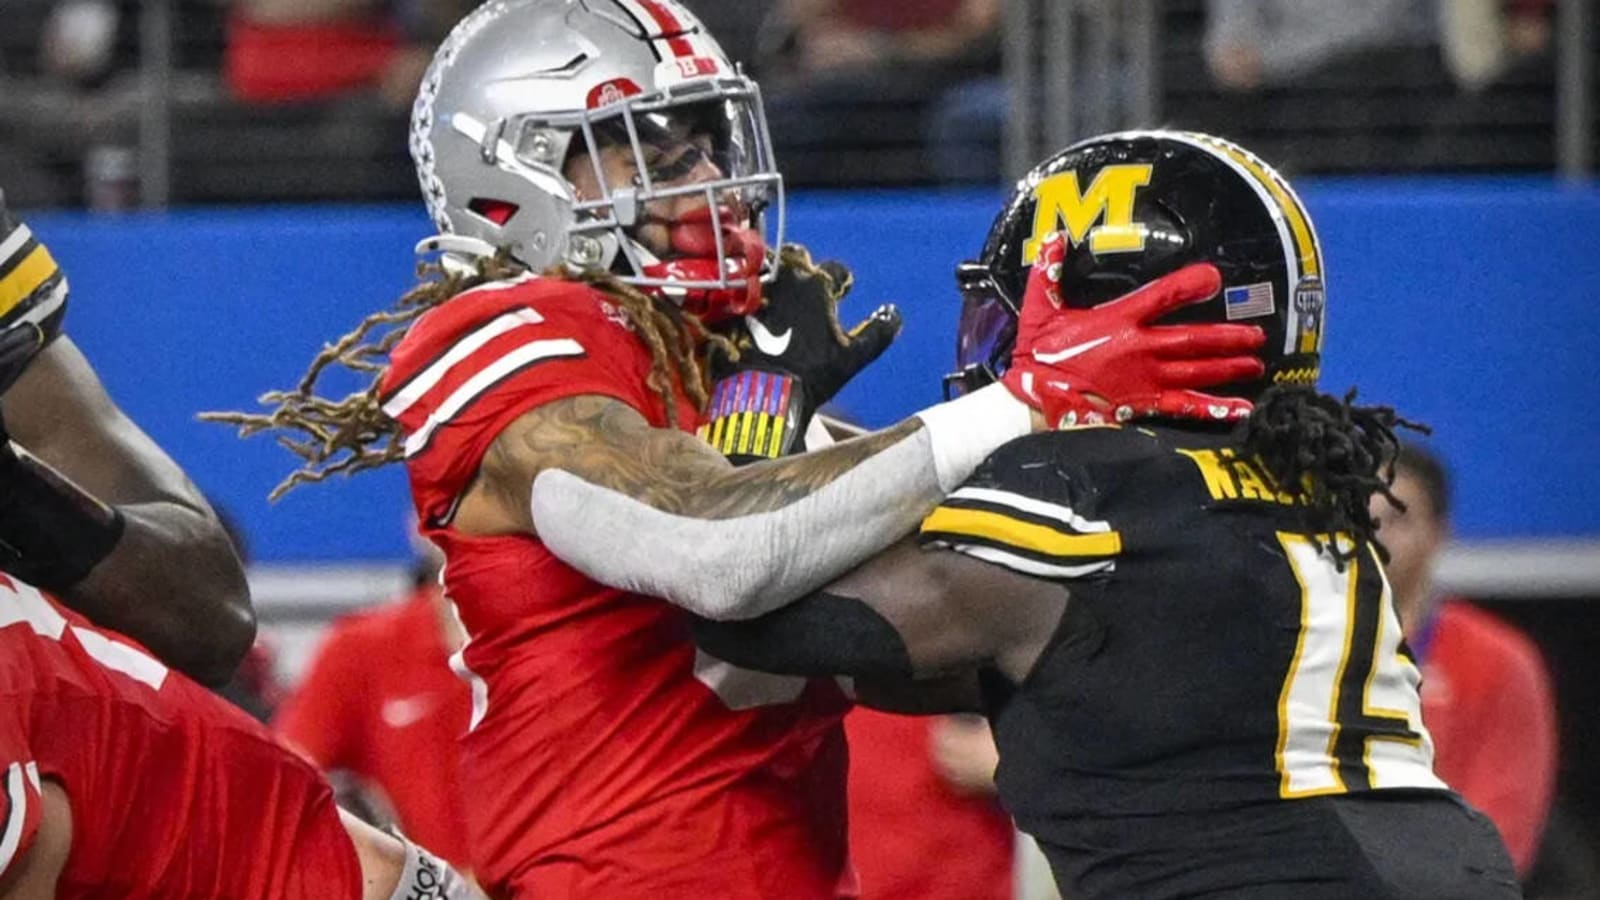 Former high profile recruit on offense could finally break out for Buckeyes as a senior